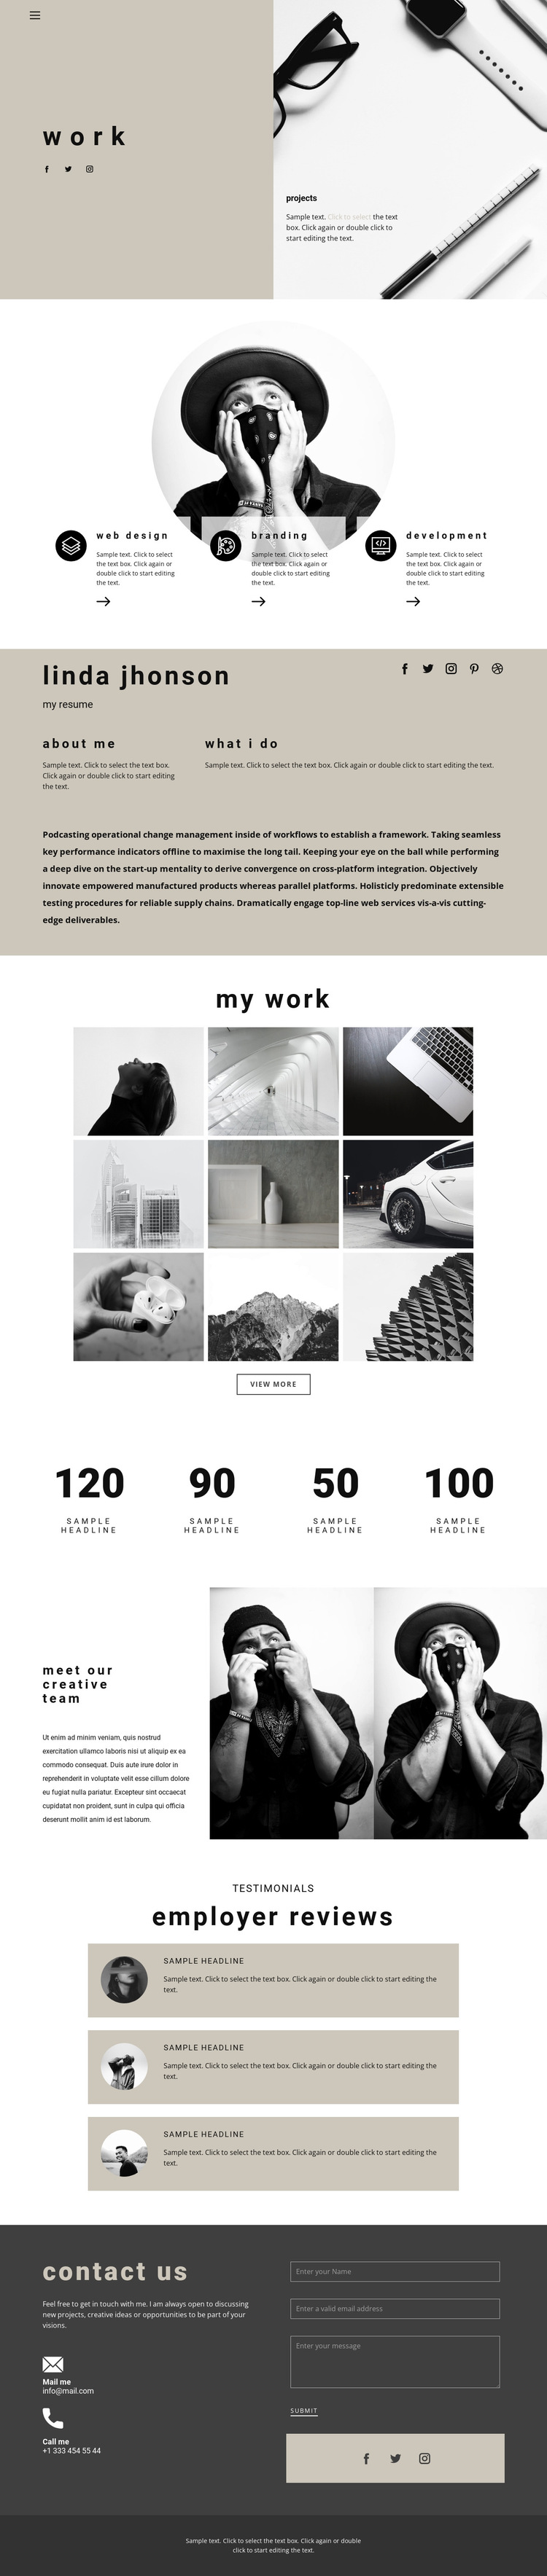 Art space resume HTML5 Template